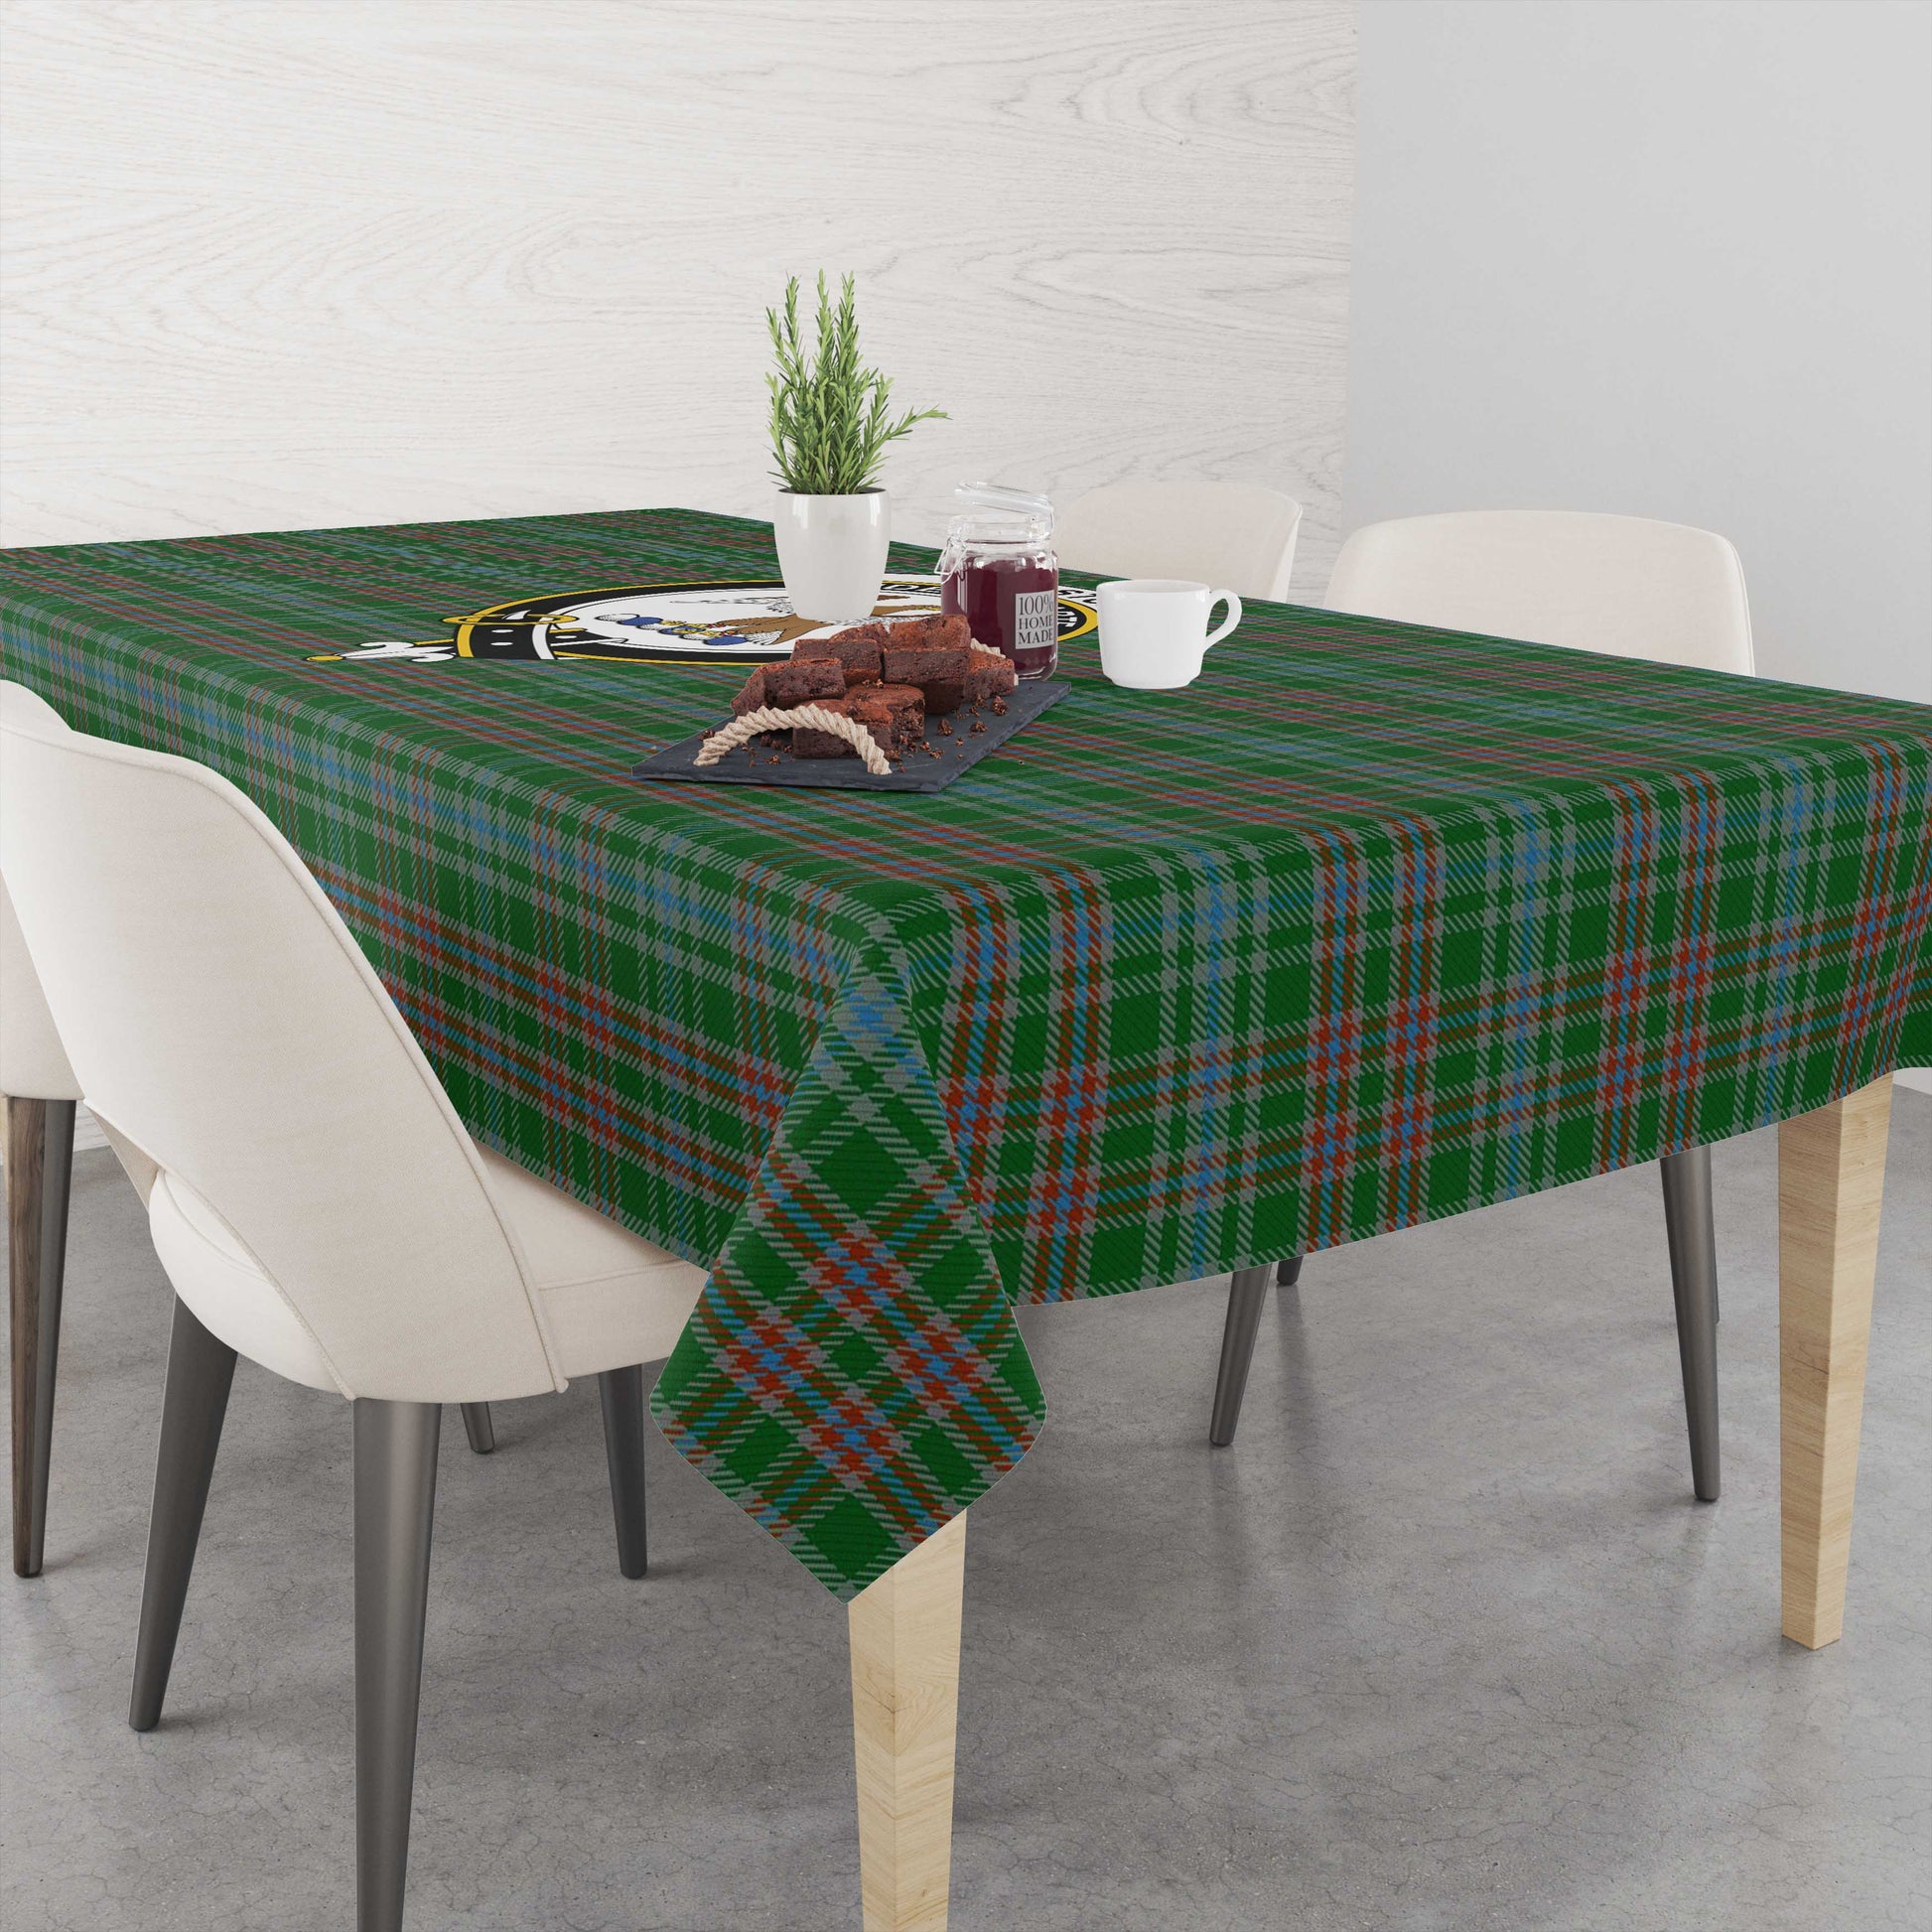 ralston-usa-tatan-tablecloth-with-family-crest